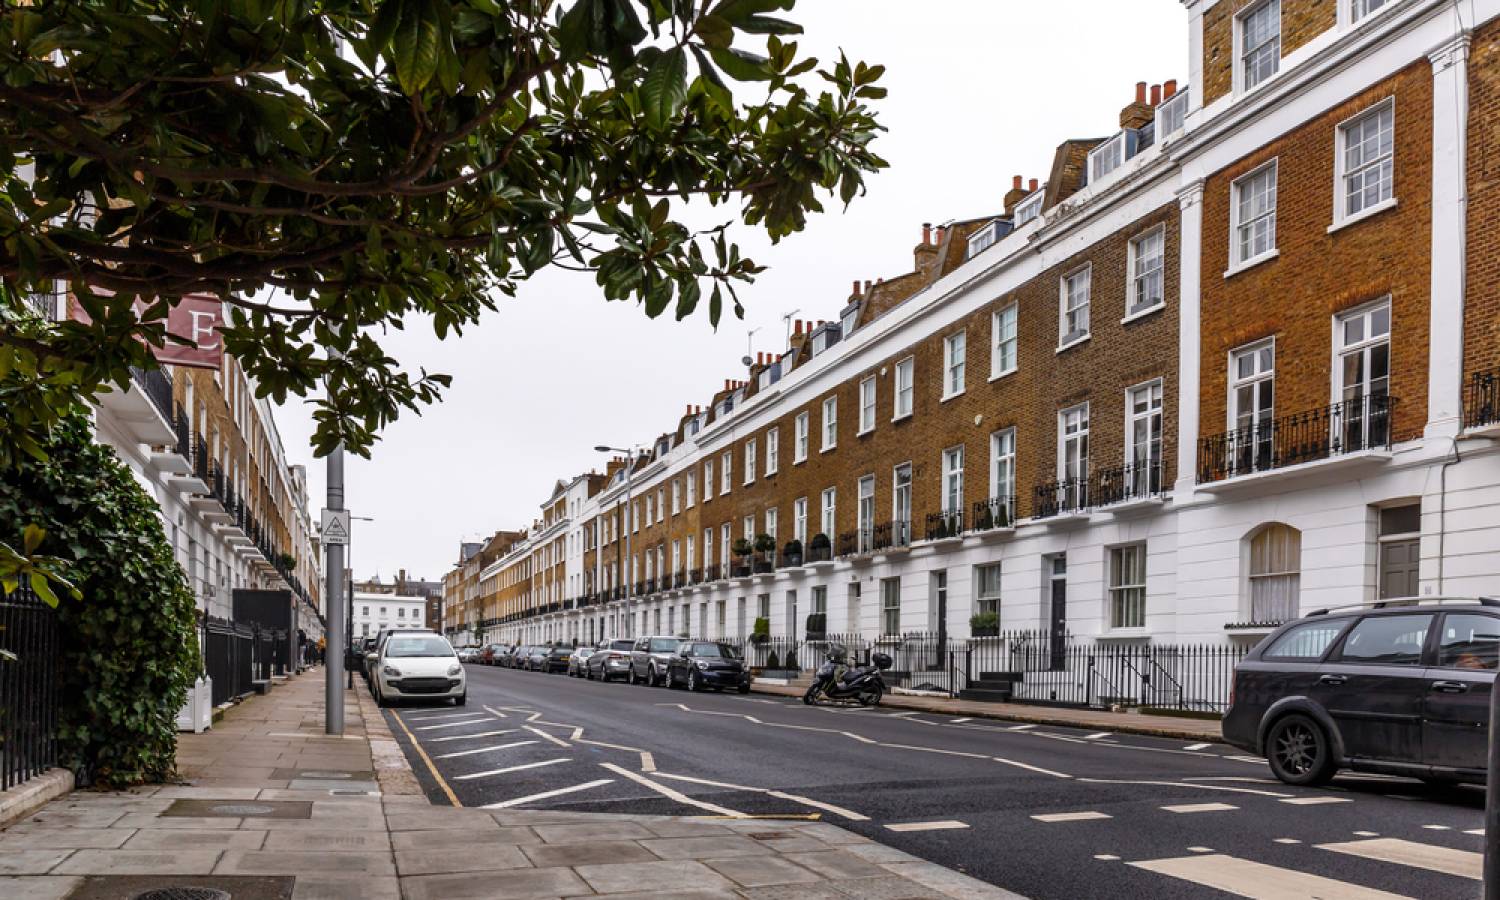 London suburbs become attractive to buyers